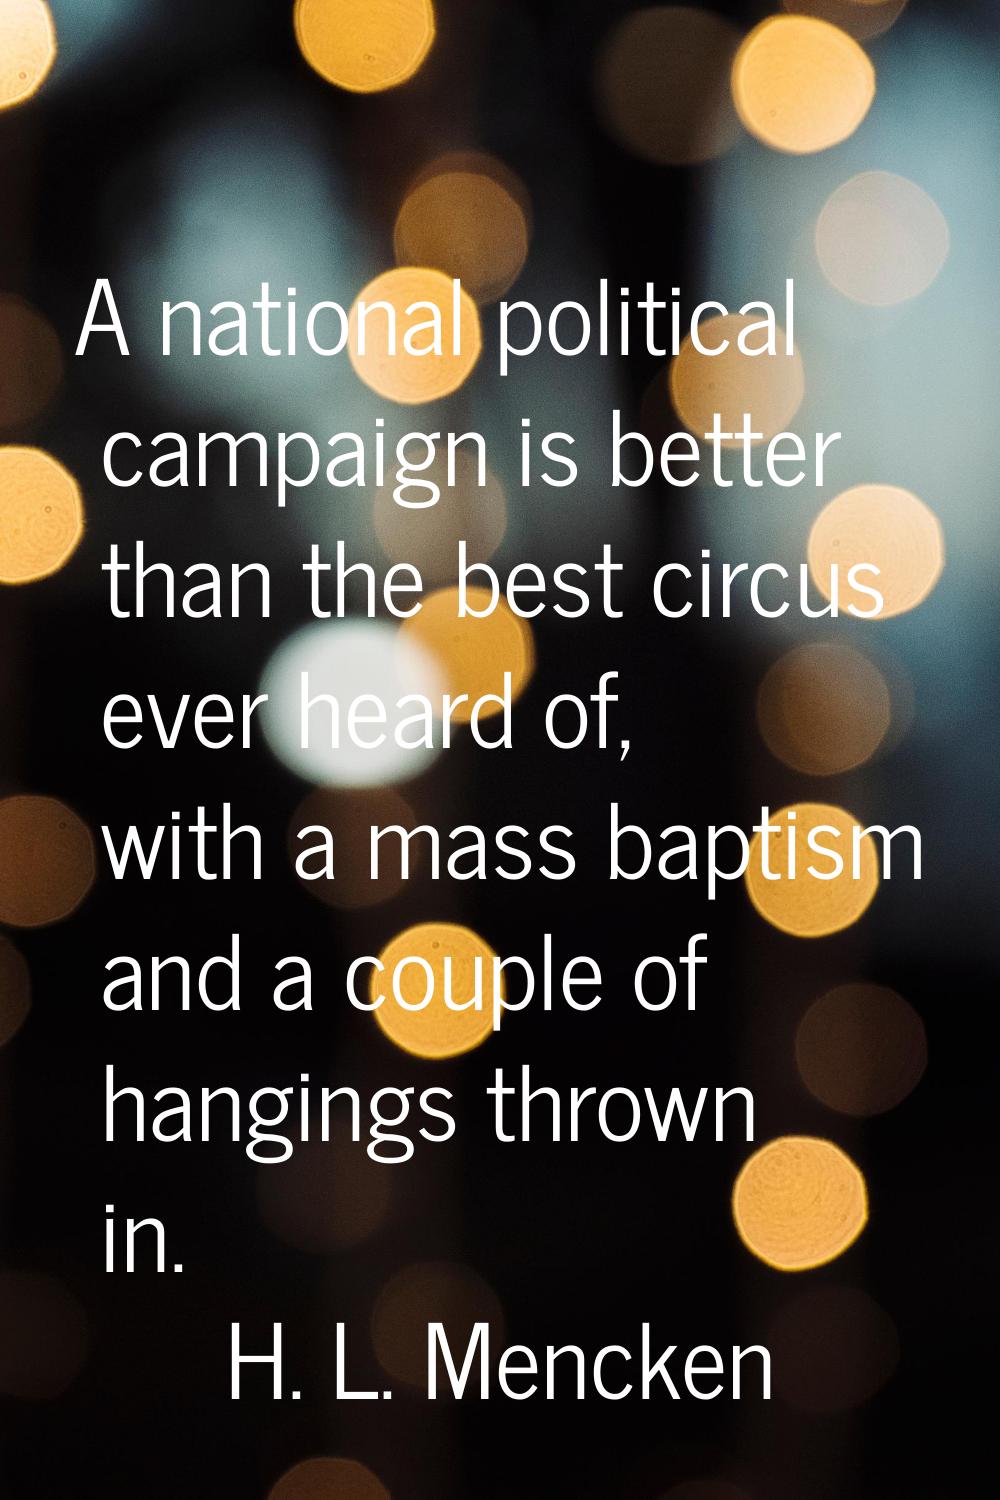 A national political campaign is better than the best circus ever heard of, with a mass baptism and